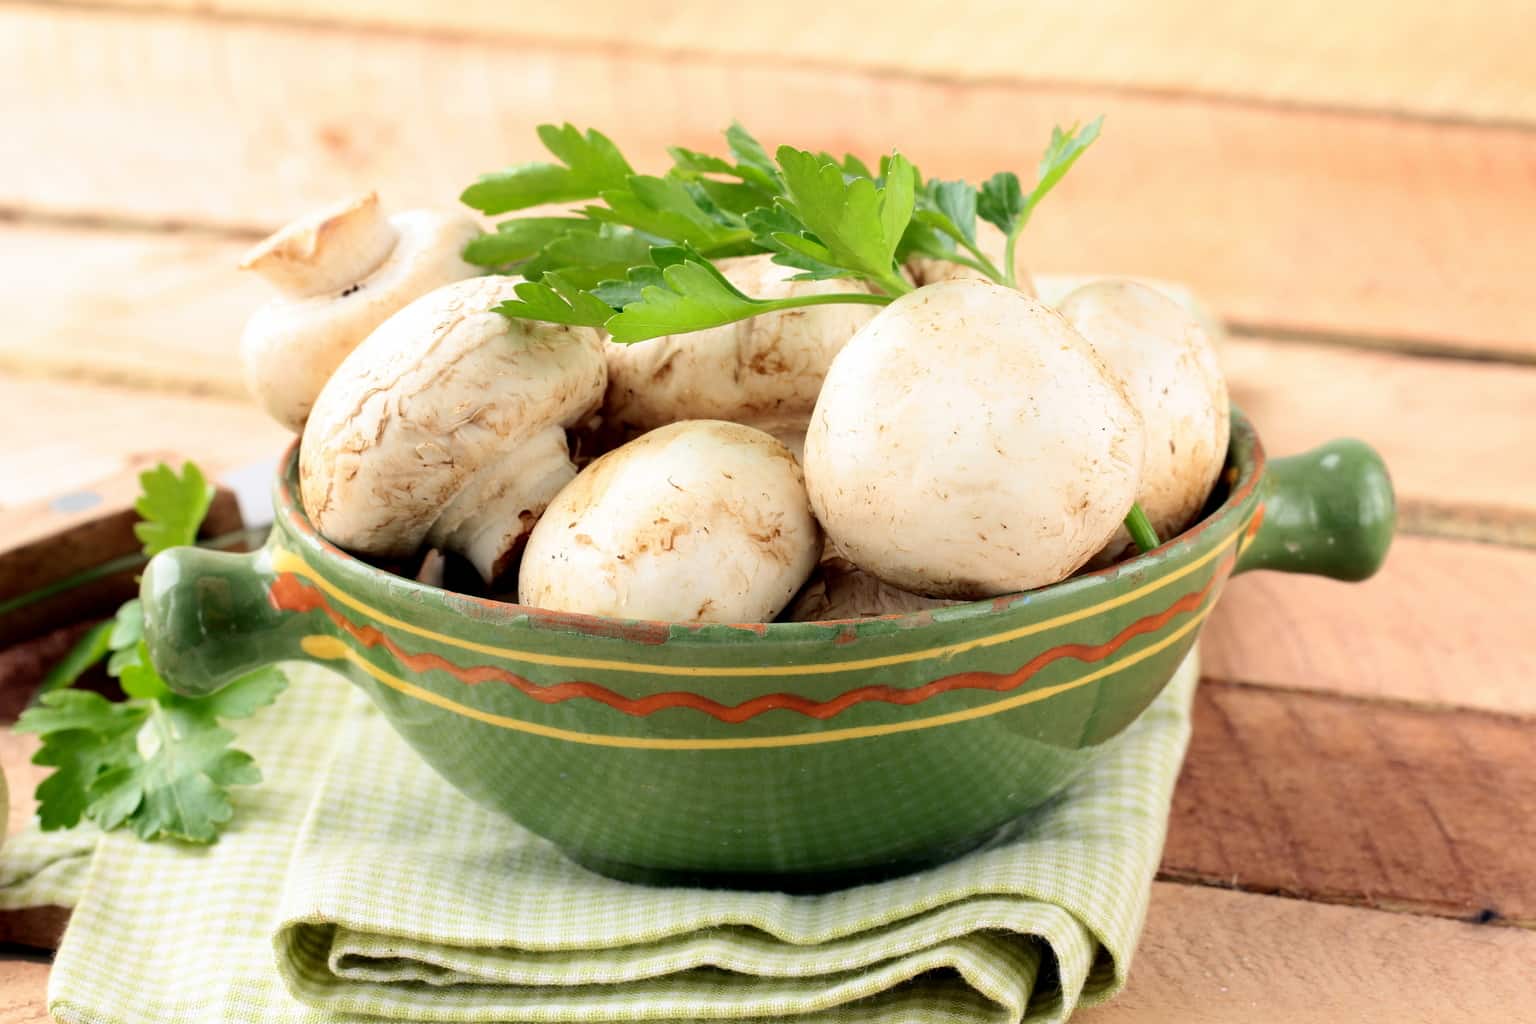 White button mushrooms fight prostate cancer